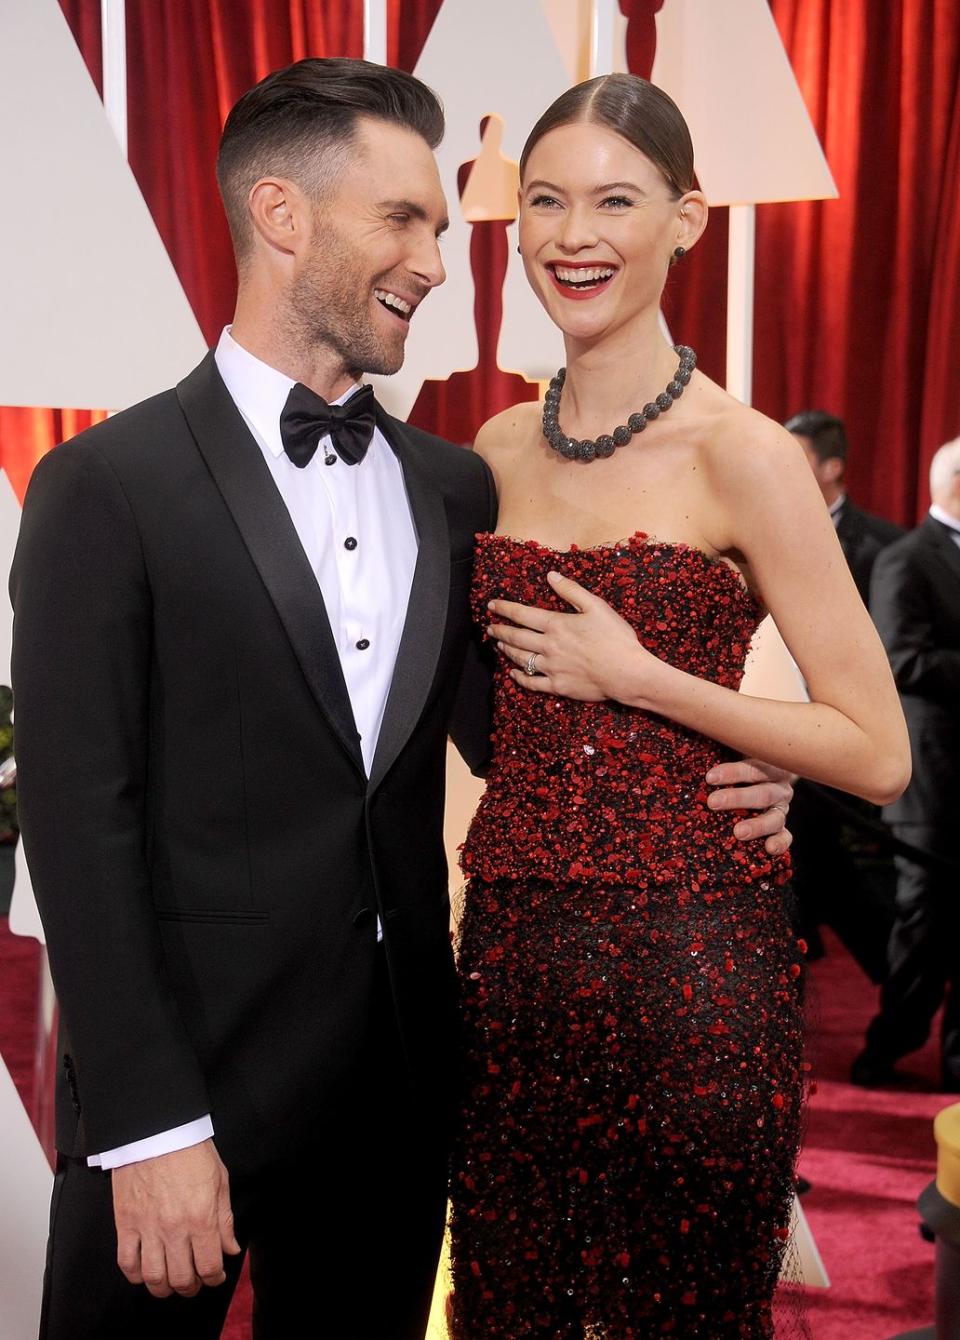 <p><strong>Age gap: </strong>10 years</p><p>Maroon 5 frontman Adam Levine, 40, and his Victoria's Secret model wife, Behati Prinsloo, 31, have been married since 2014. They welcomed two daughters, Dusty Rose and Gio Grace, in 2016 and 2018.</p>